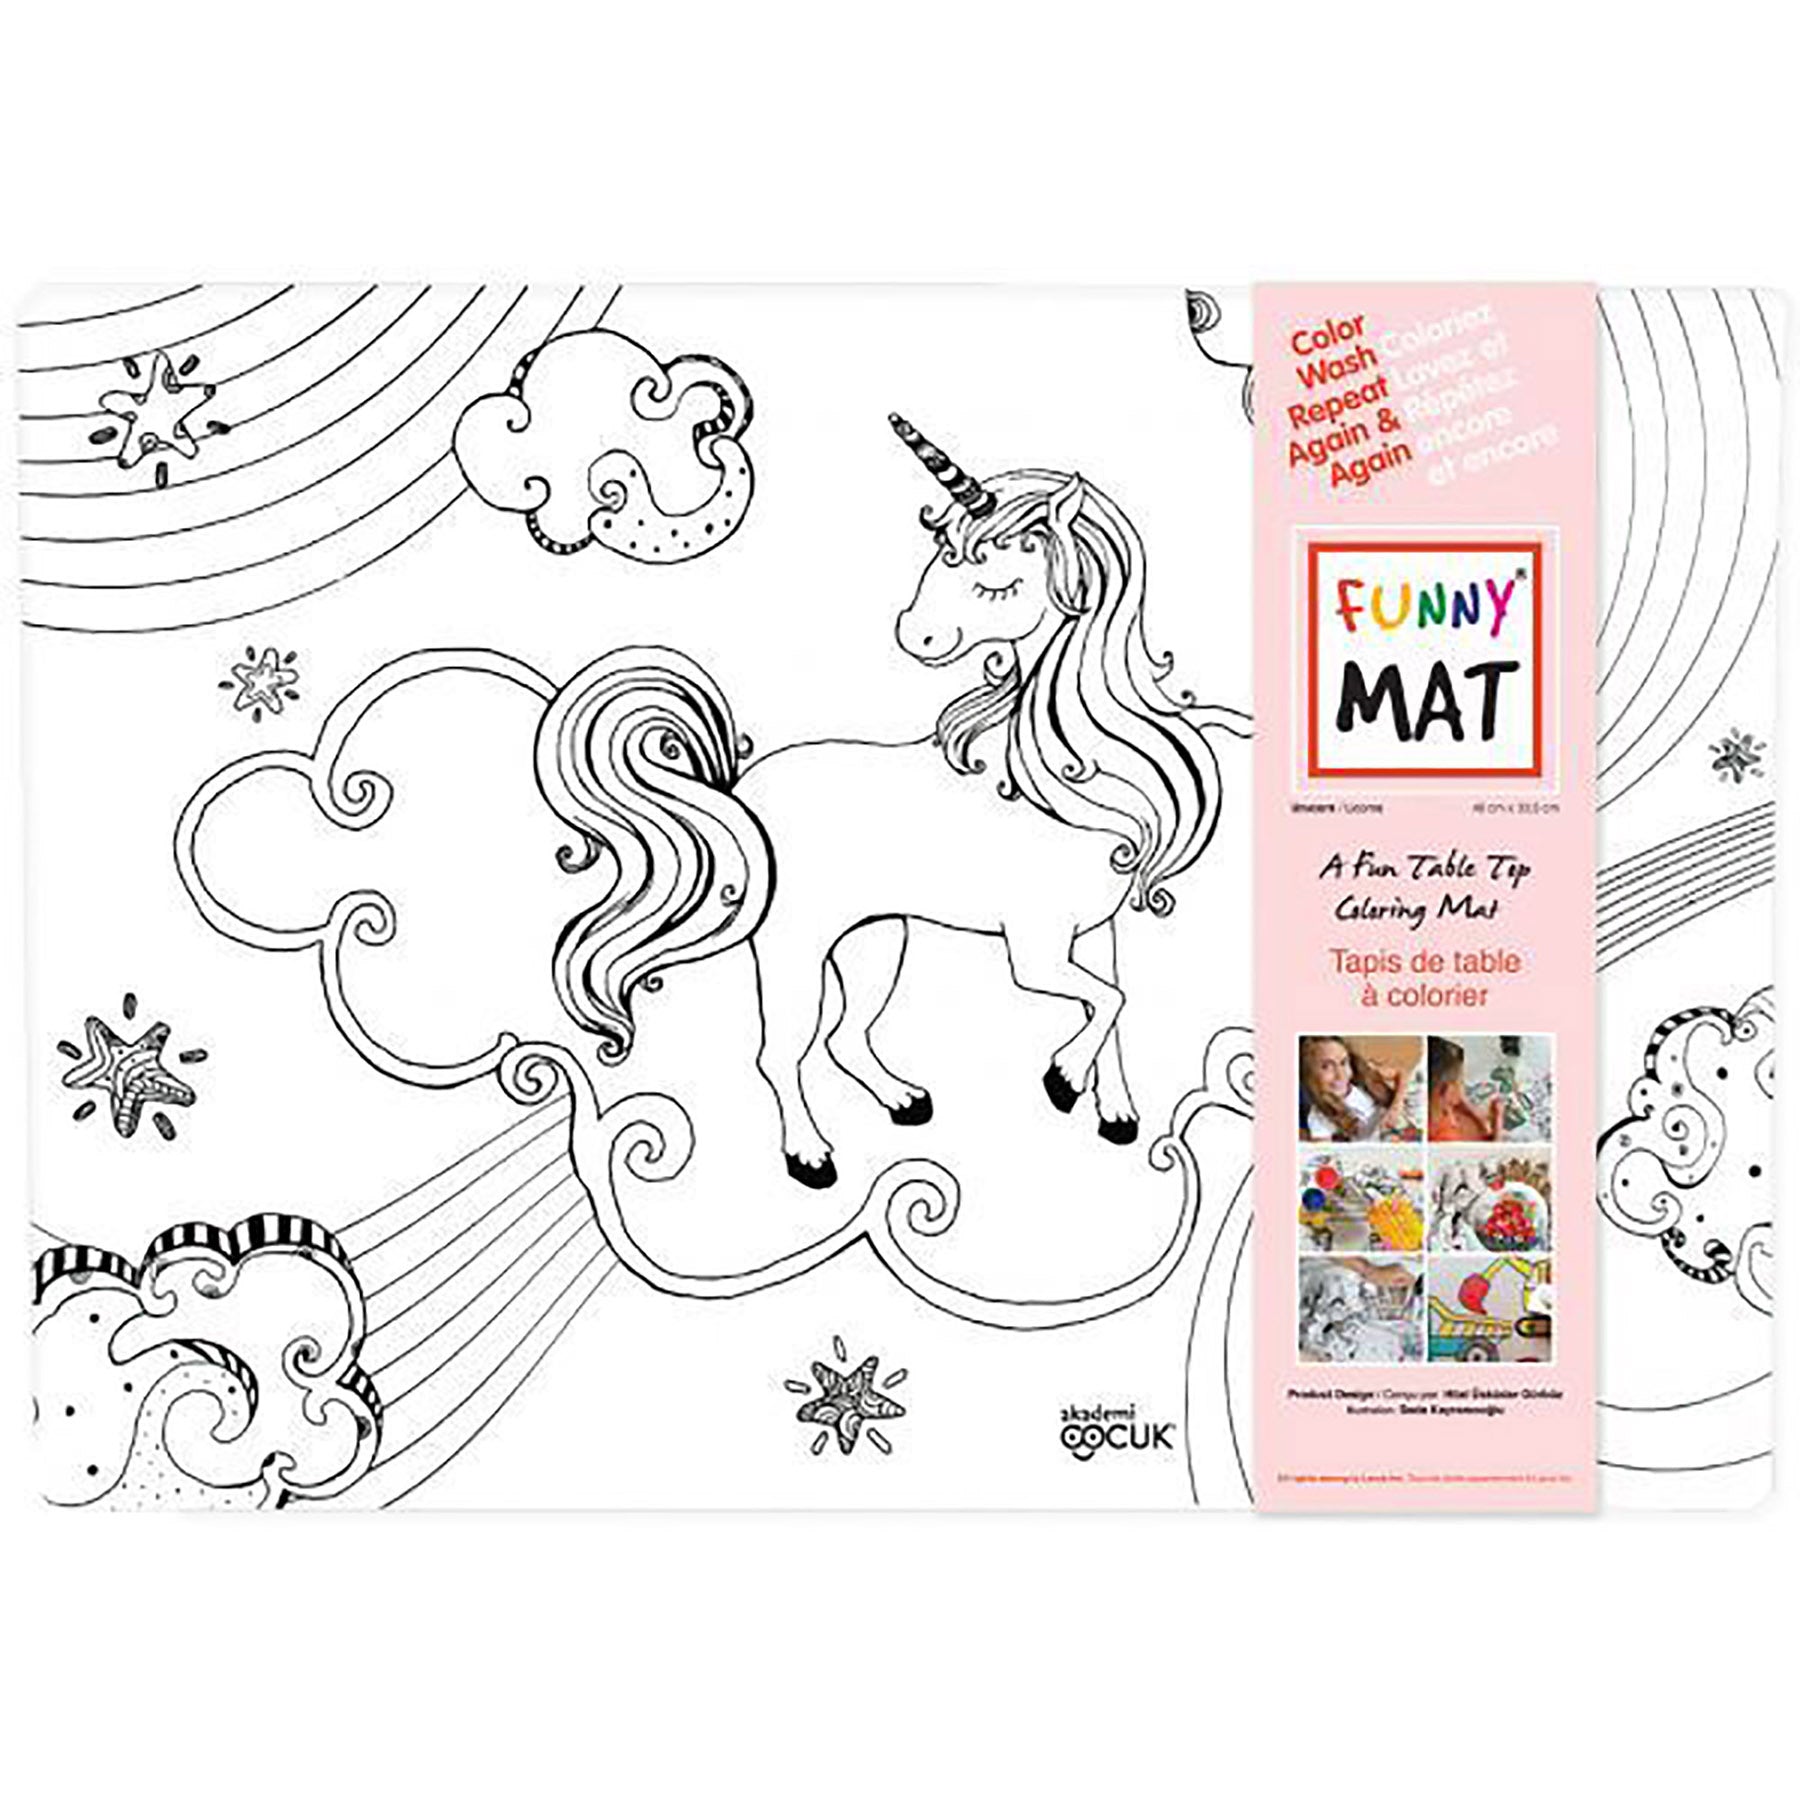 Funny Mat Coloring Placemat - Unicorn 18.9x13.2in